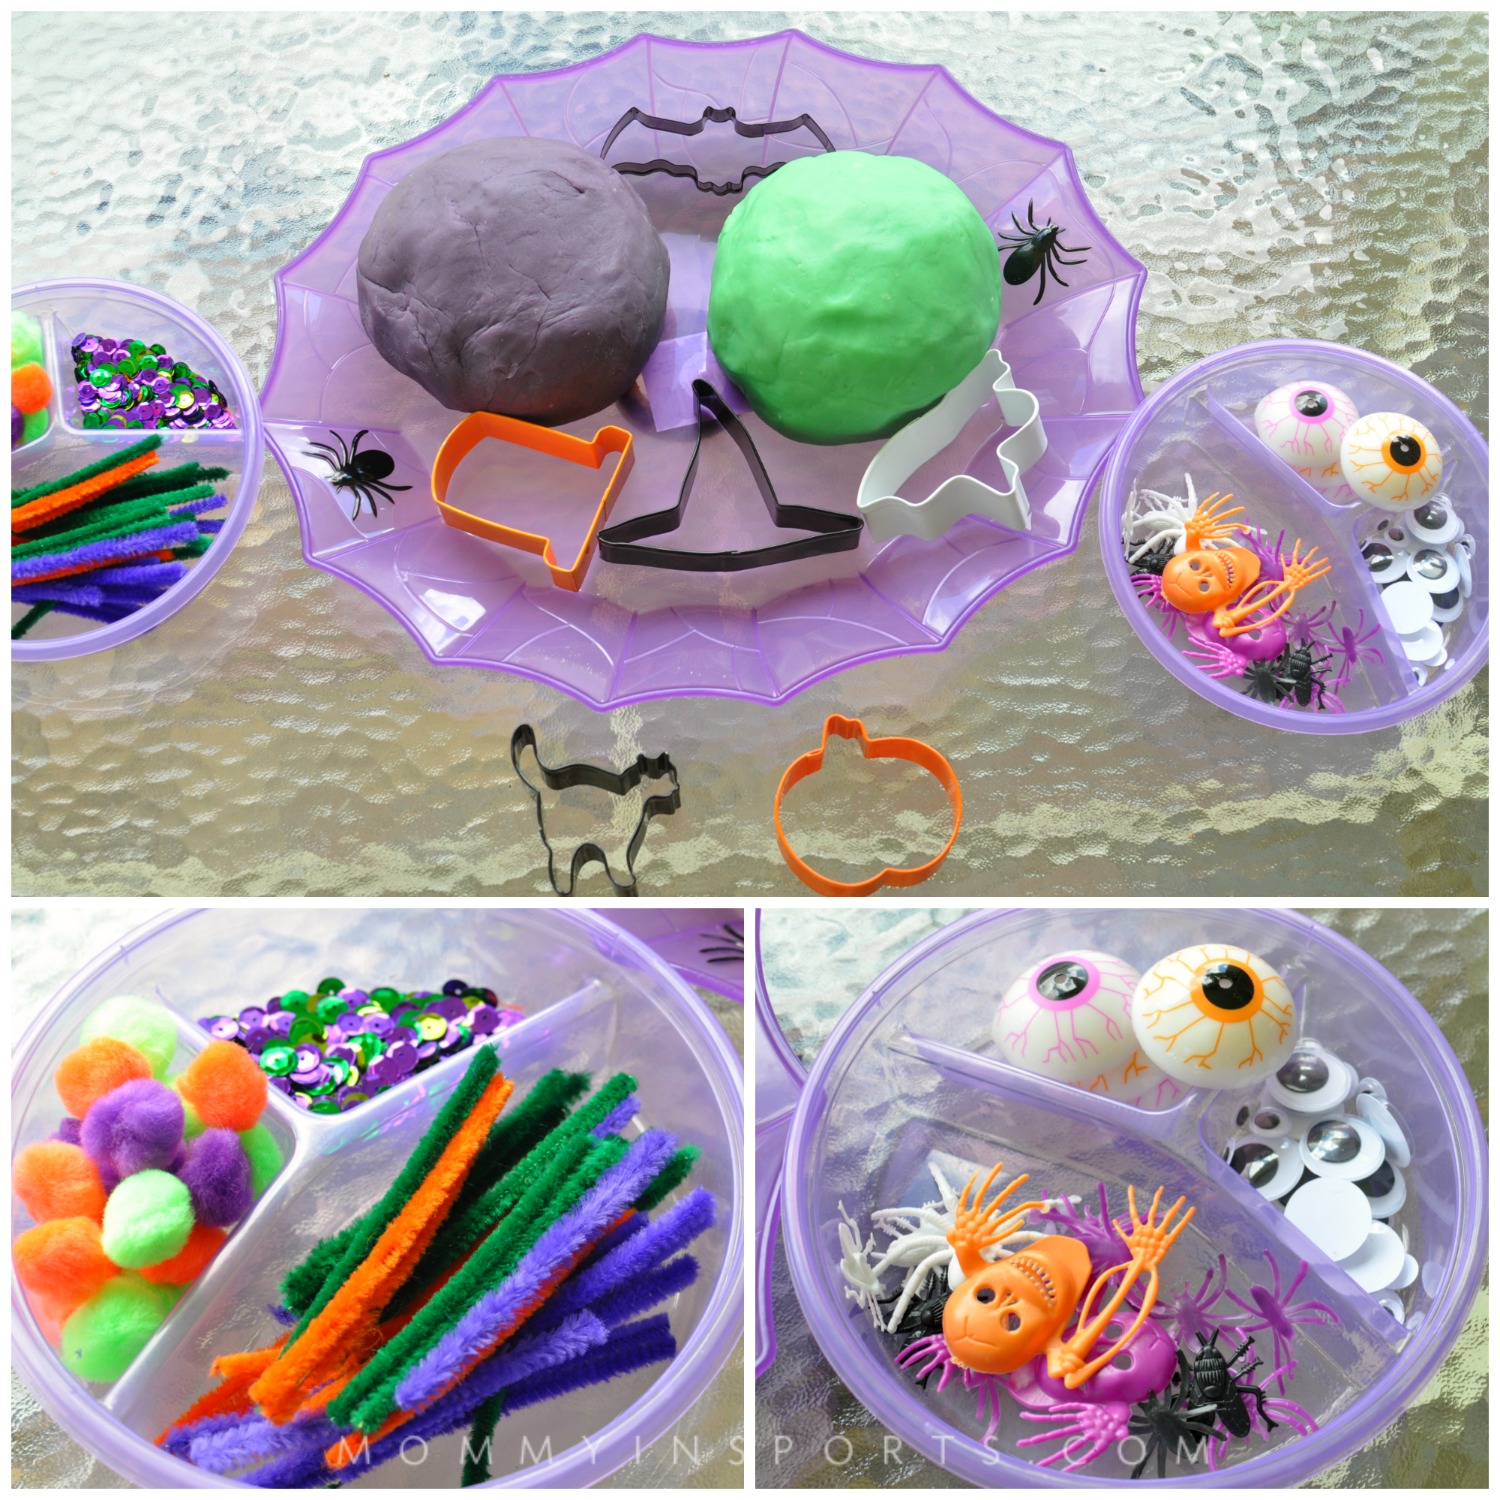 It's that time of your for spooky ghosts and goblins! Make this Monster Halloween Playdough and wow your kids with a fun and easy art project!